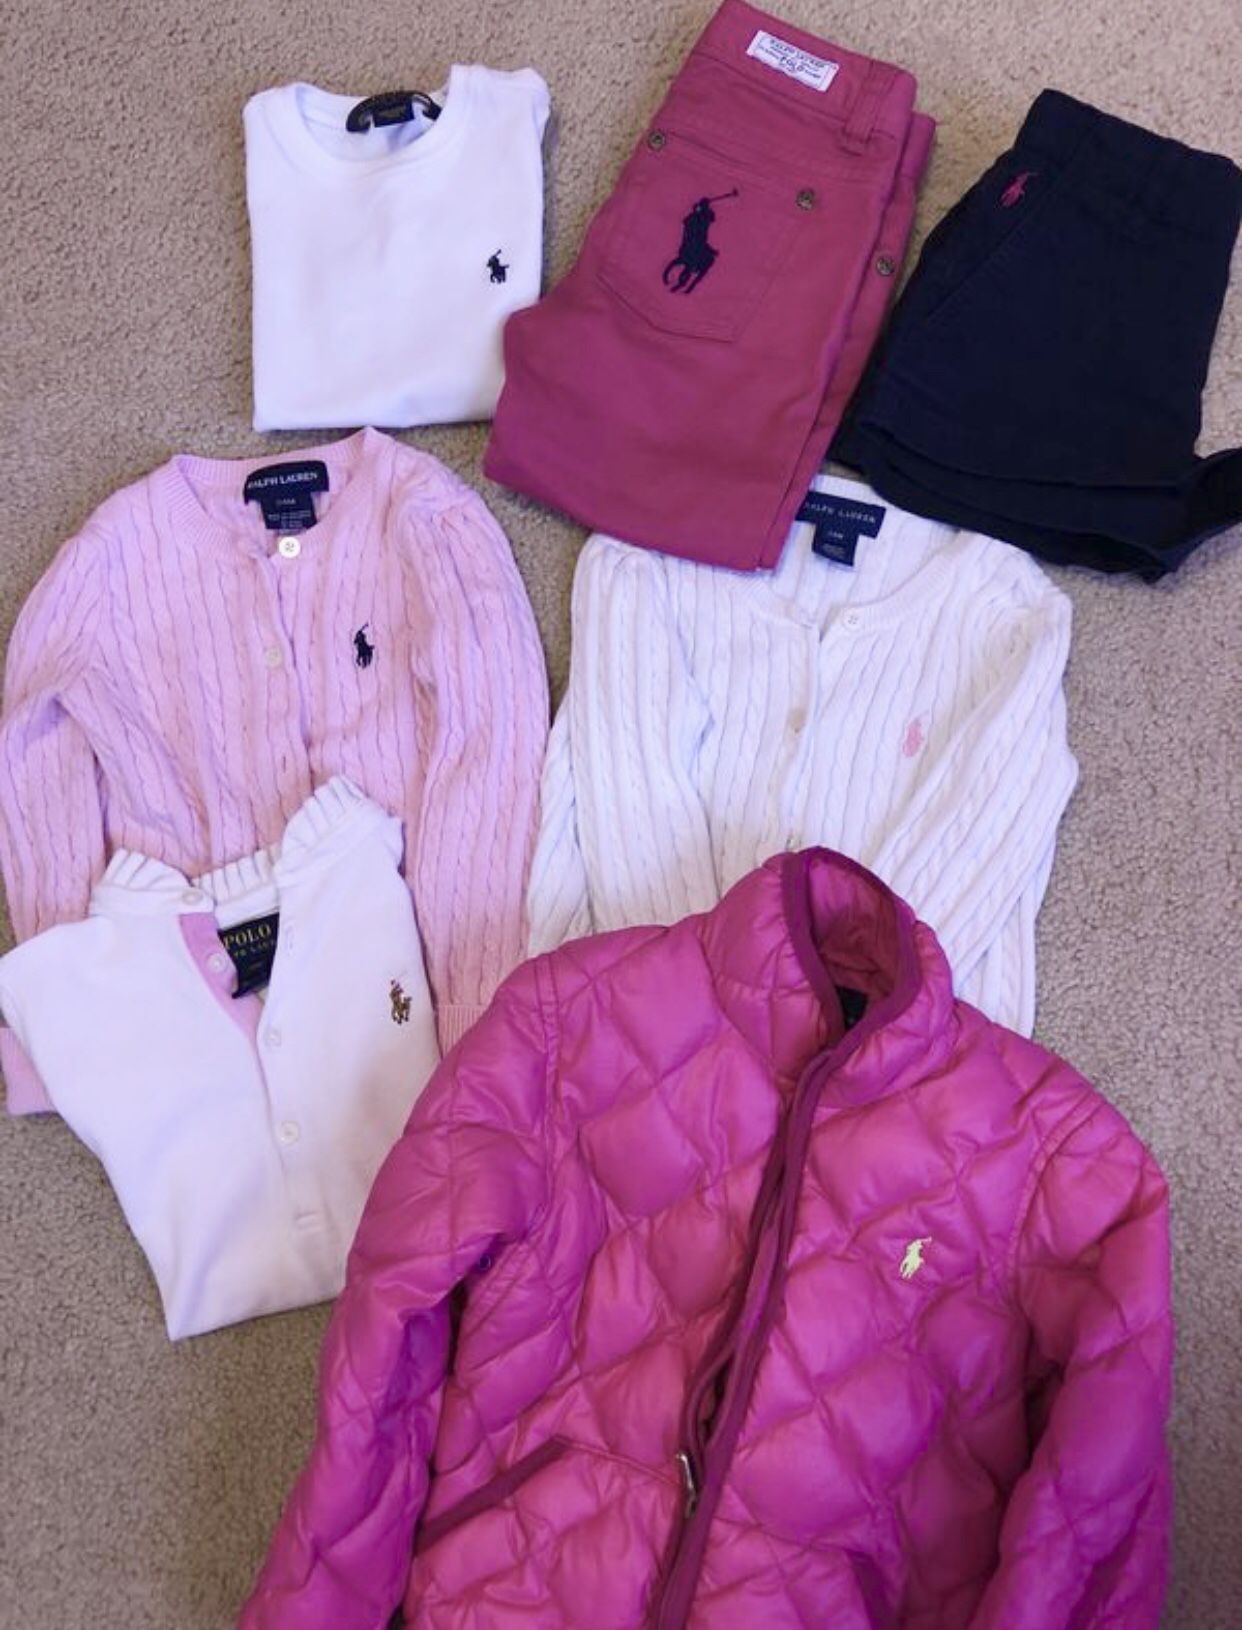 Polo Ralph Lauren Clothes for Kids